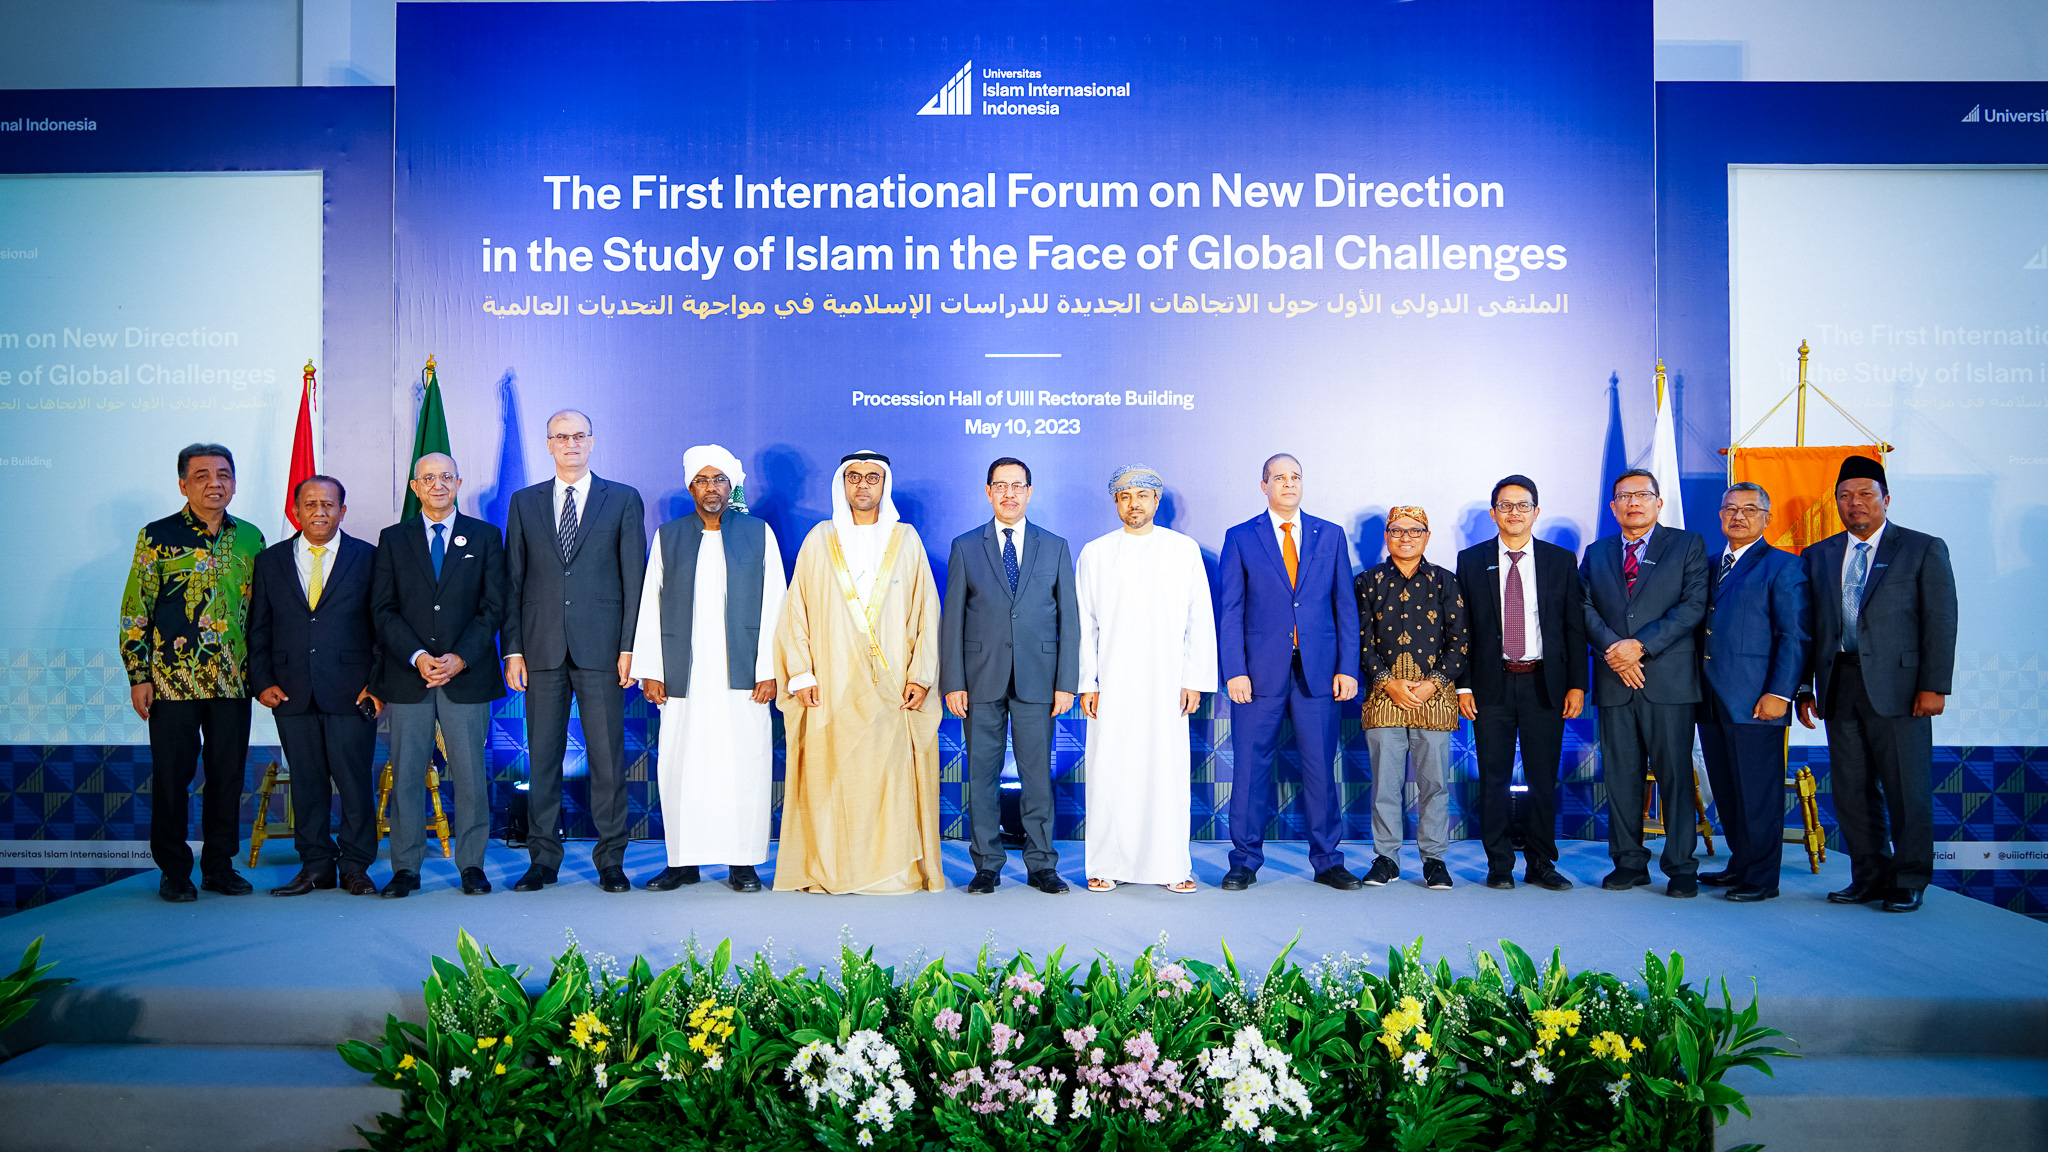 Islam in the Face of Global Challenges: Perspectives from the First International Forum on New Directions in the Study of Islam